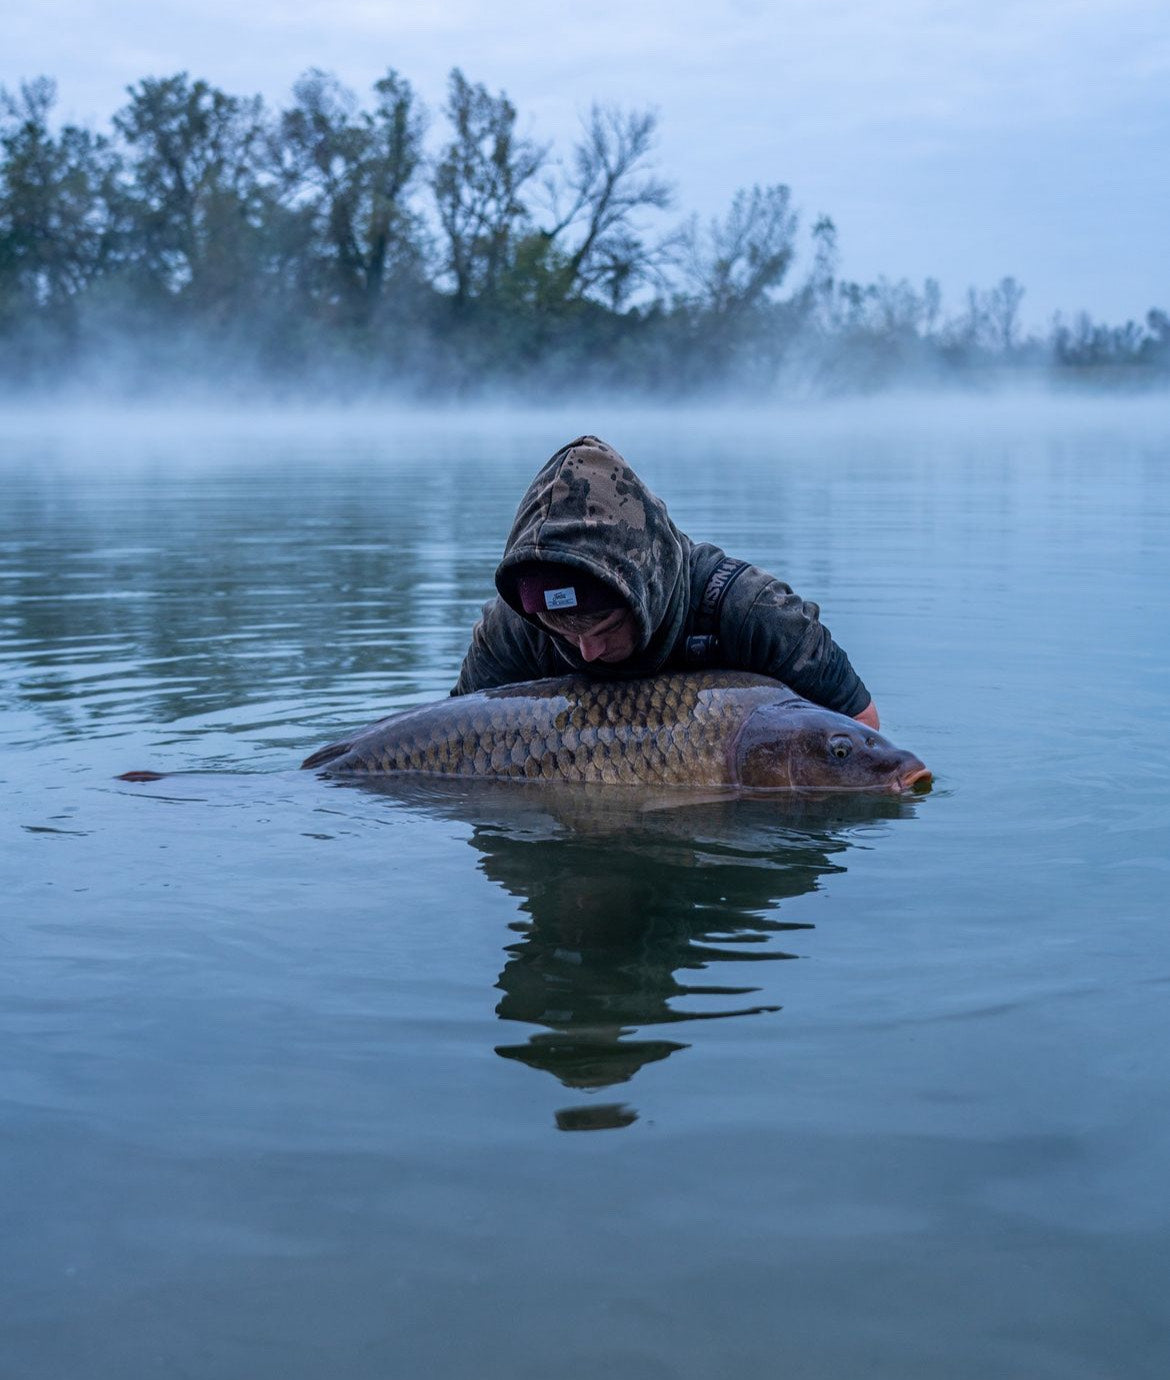 How Does Weather Affect Carp Fishing?